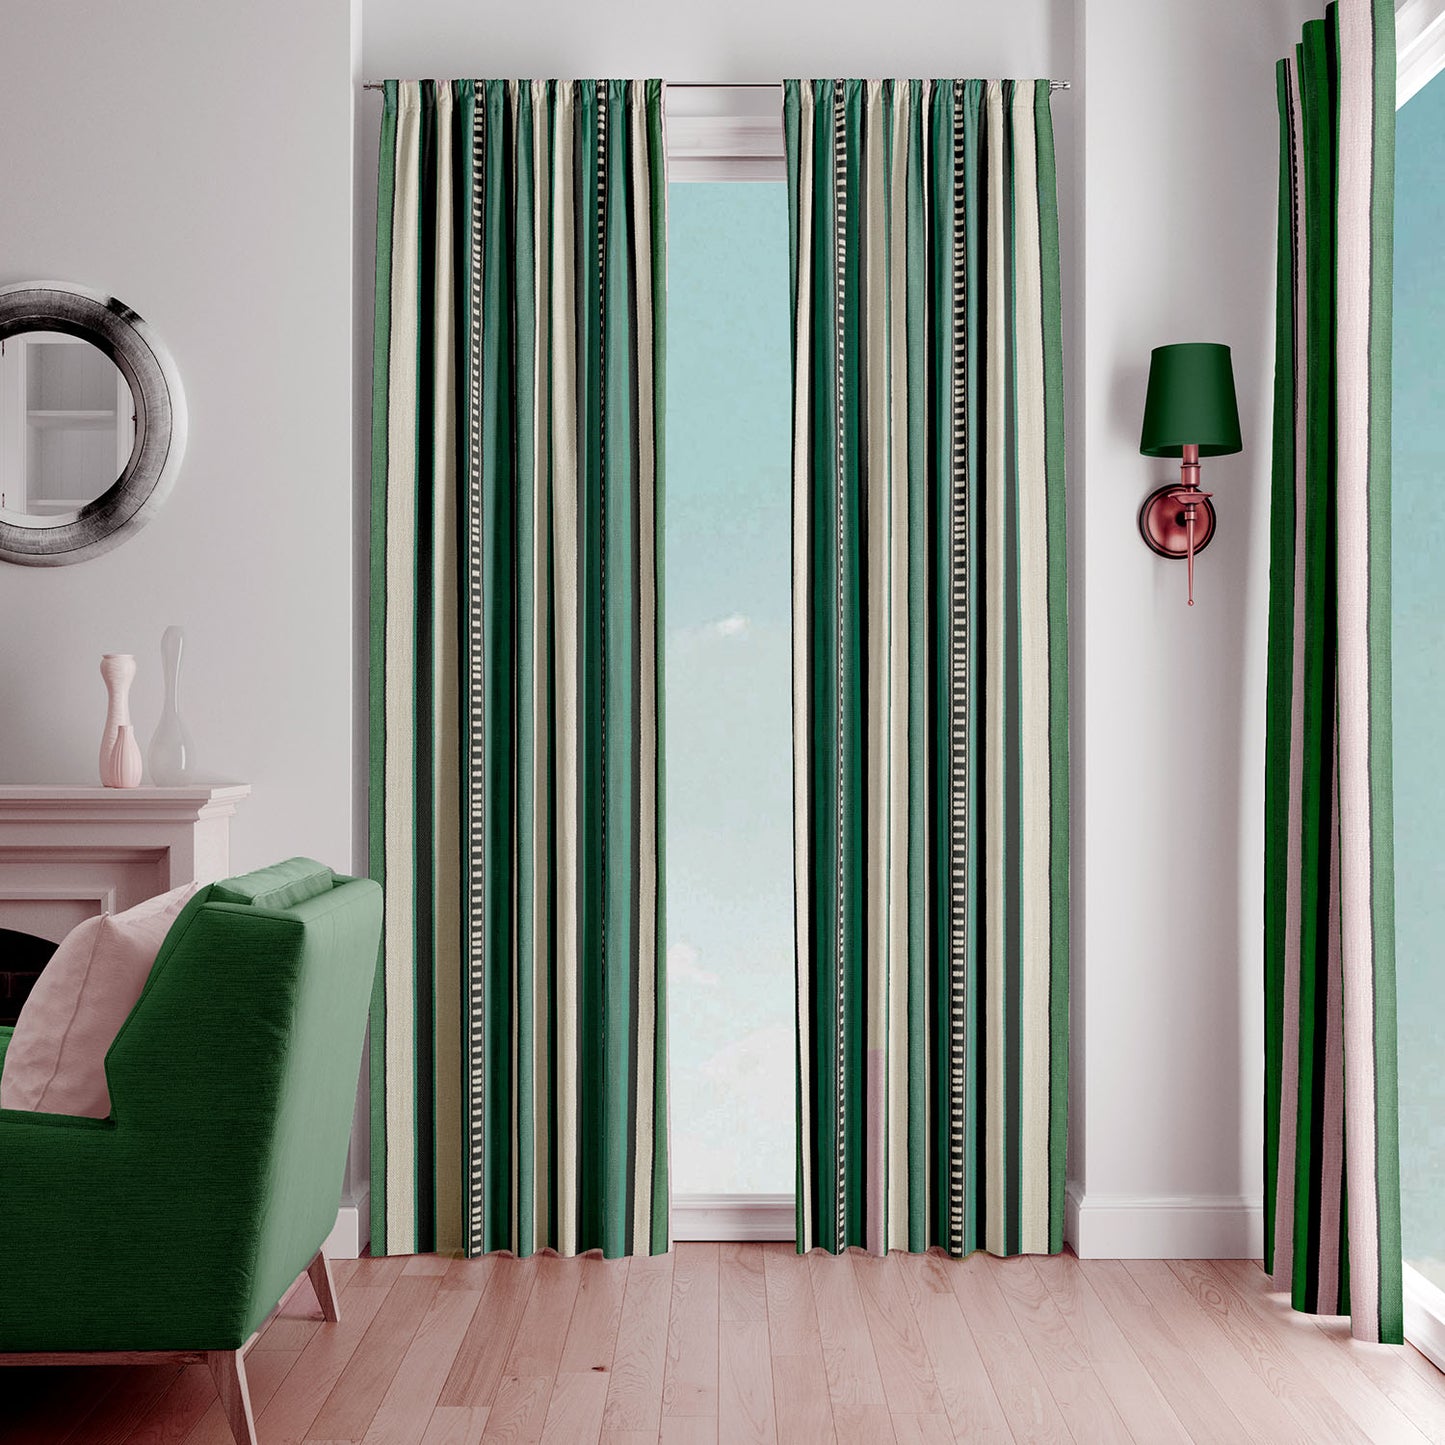 Modern Bohemian Curtains with Blackout in Colorful Ethnic Stripes  - Aqua